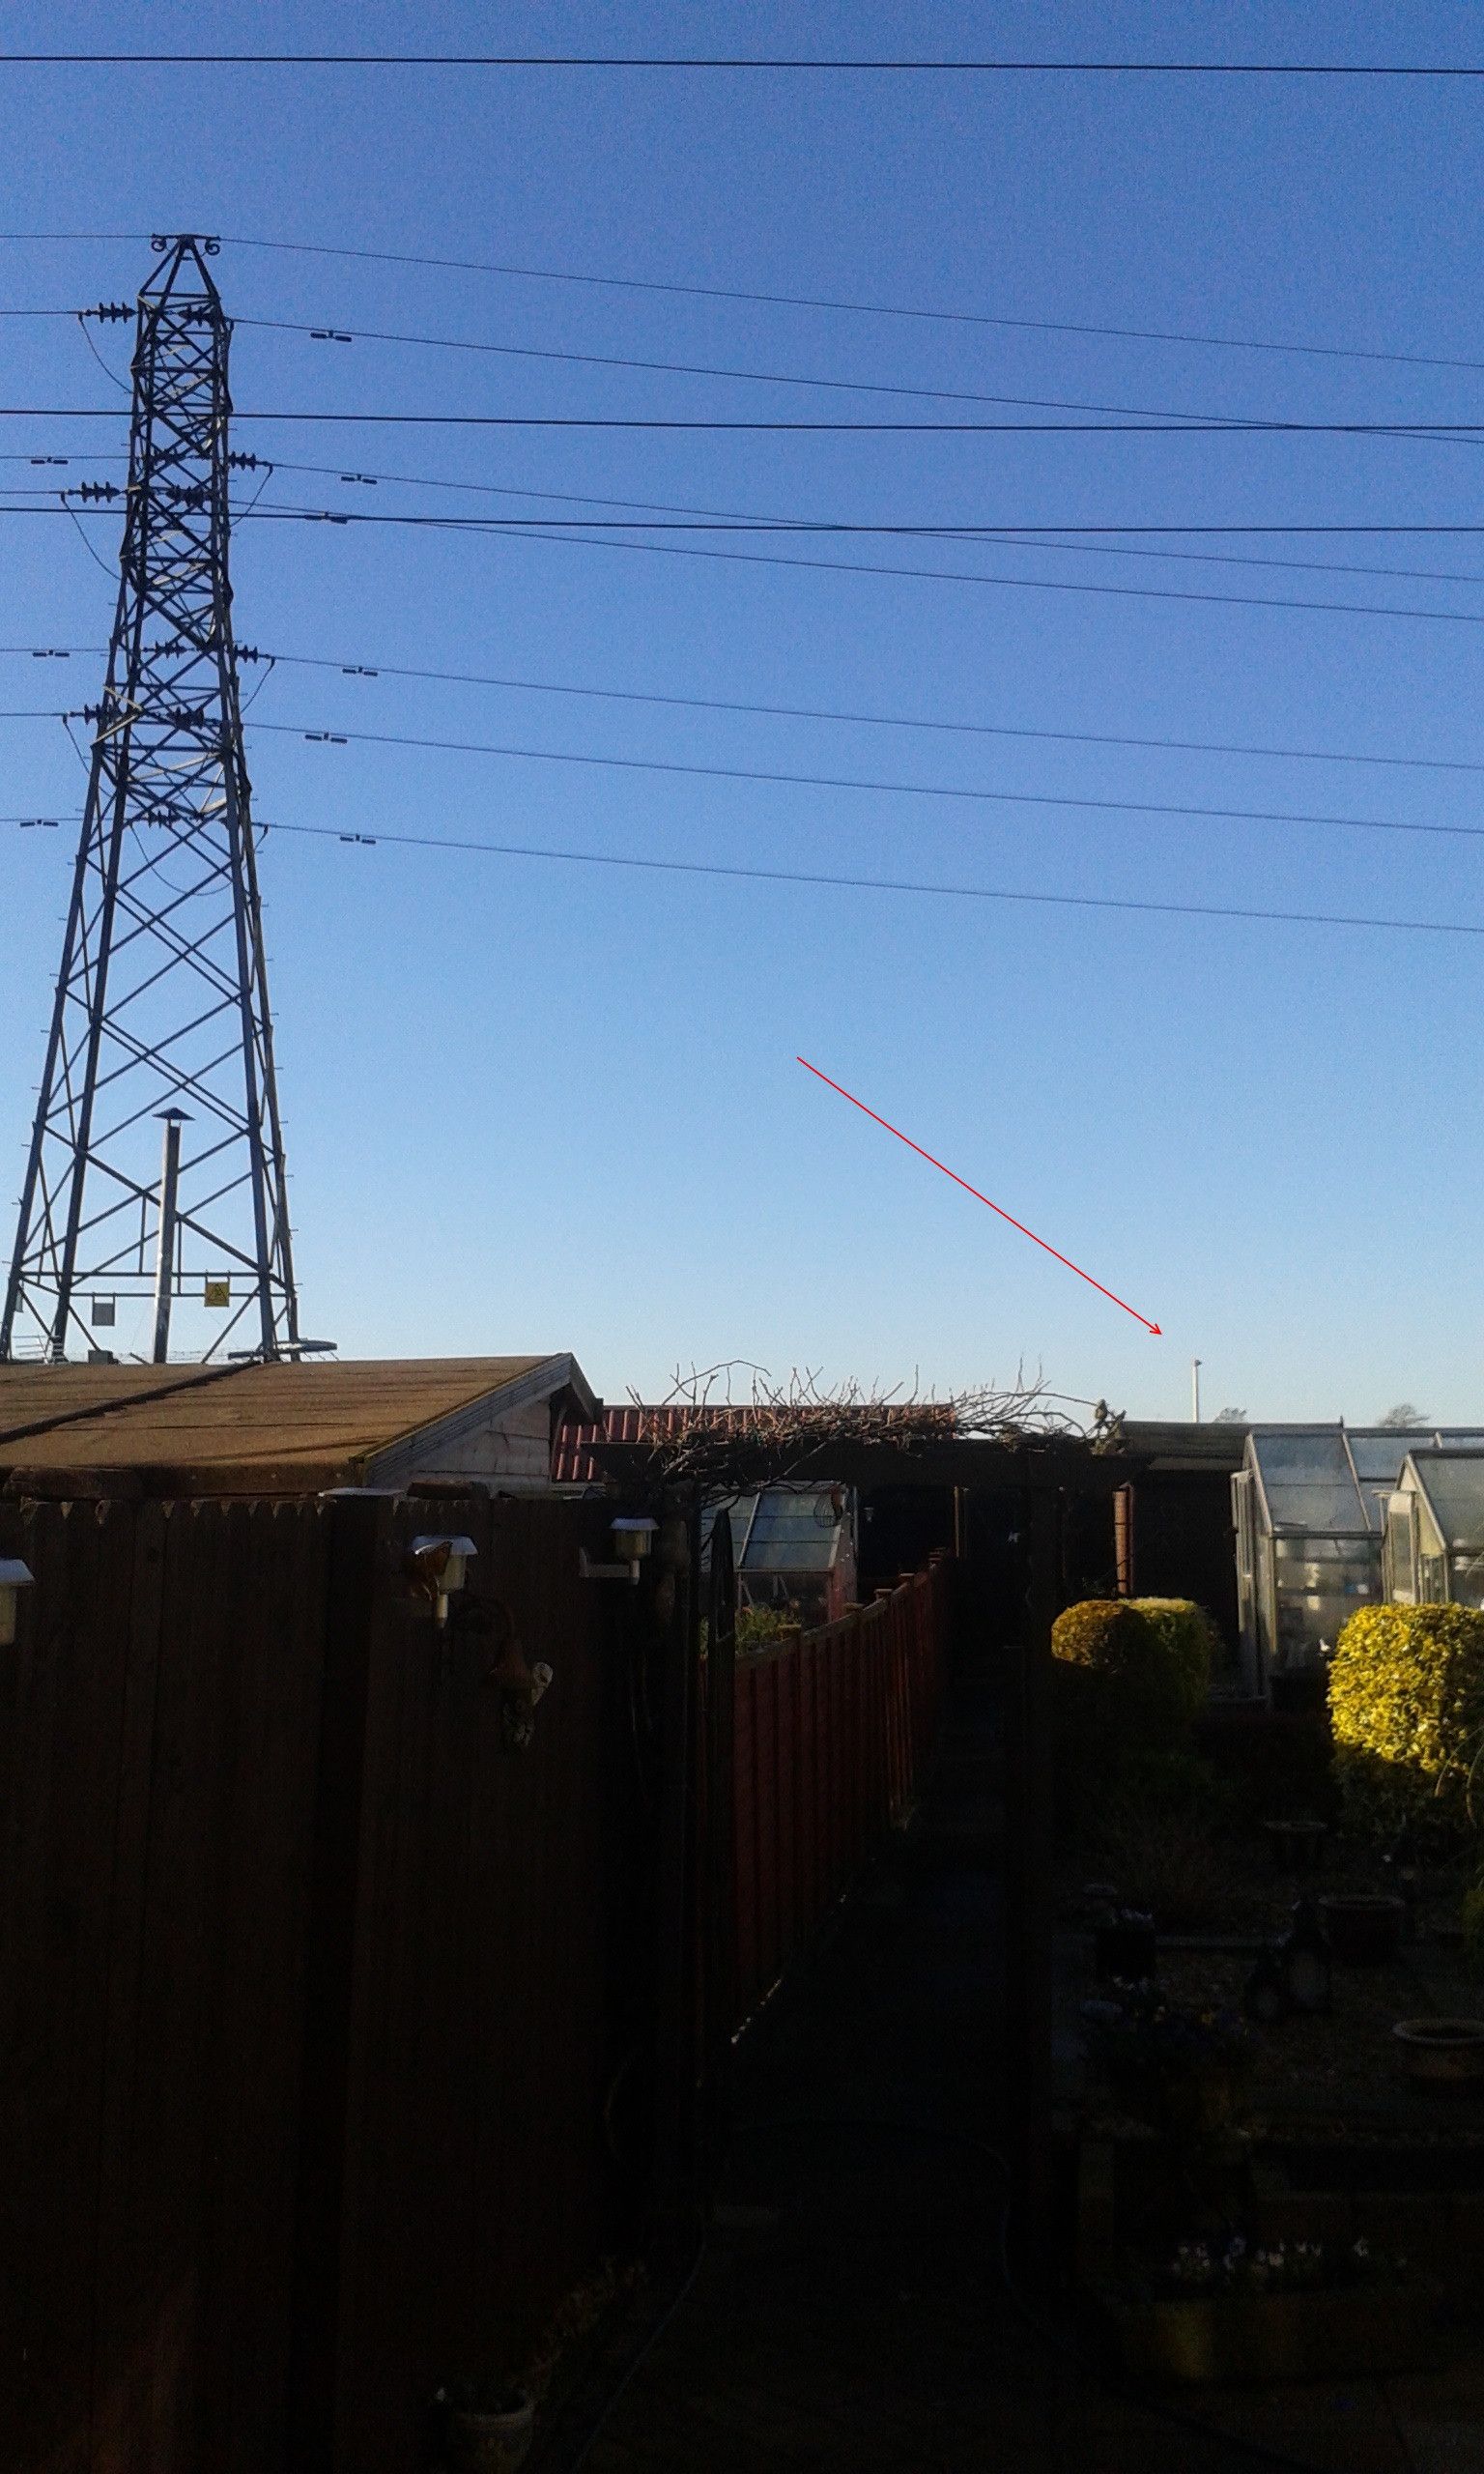 My parents are upset that a wind turbine is being installed and will "spoil their view"